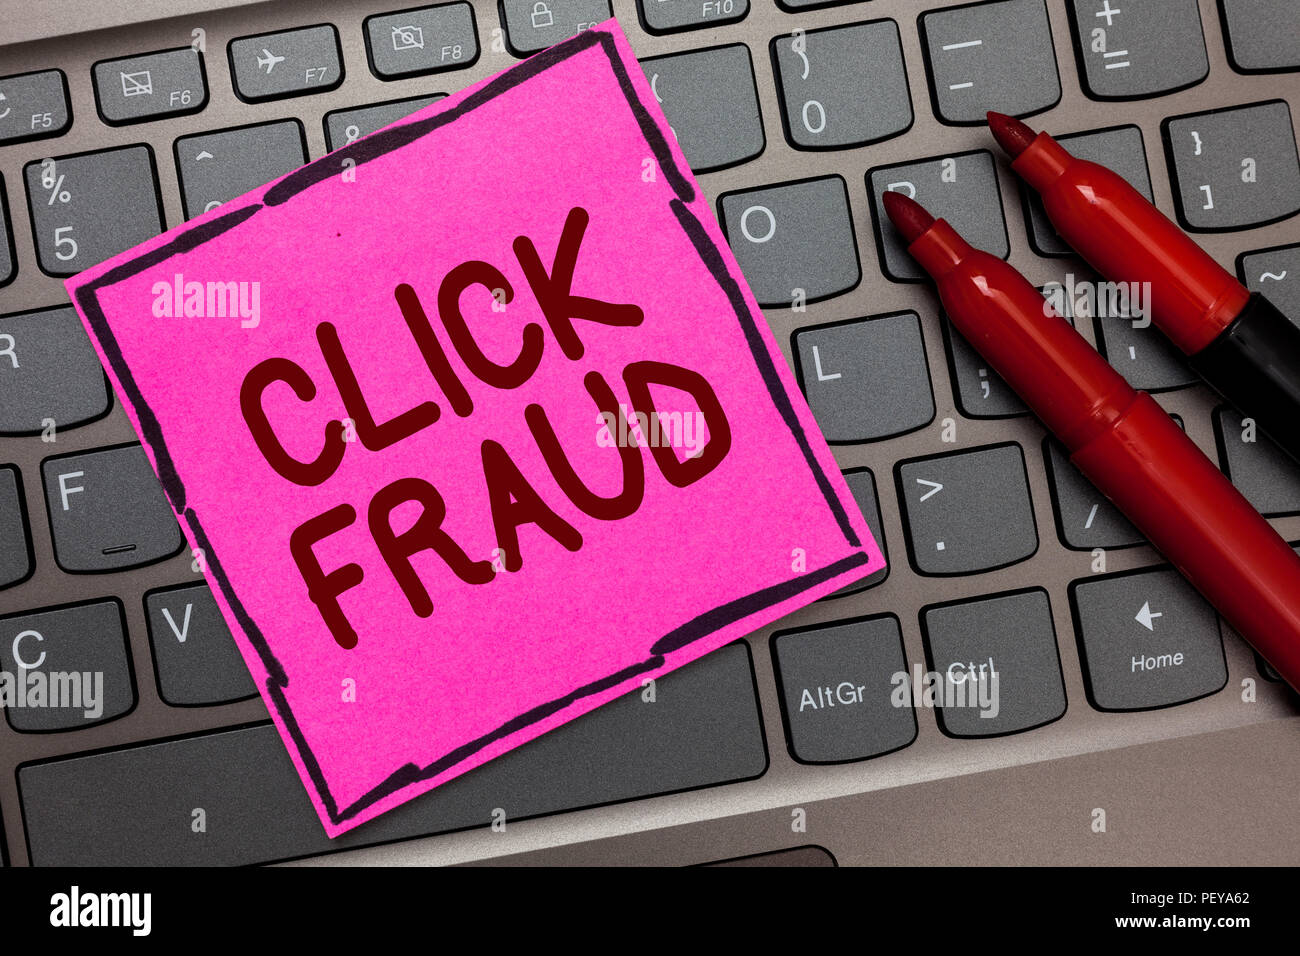 Text sign showing Click Fraud. Conceptual photo practice of repeatedly clicking on advertisement hosted website Pink paper keyboard Inspiration commun Stock Photo